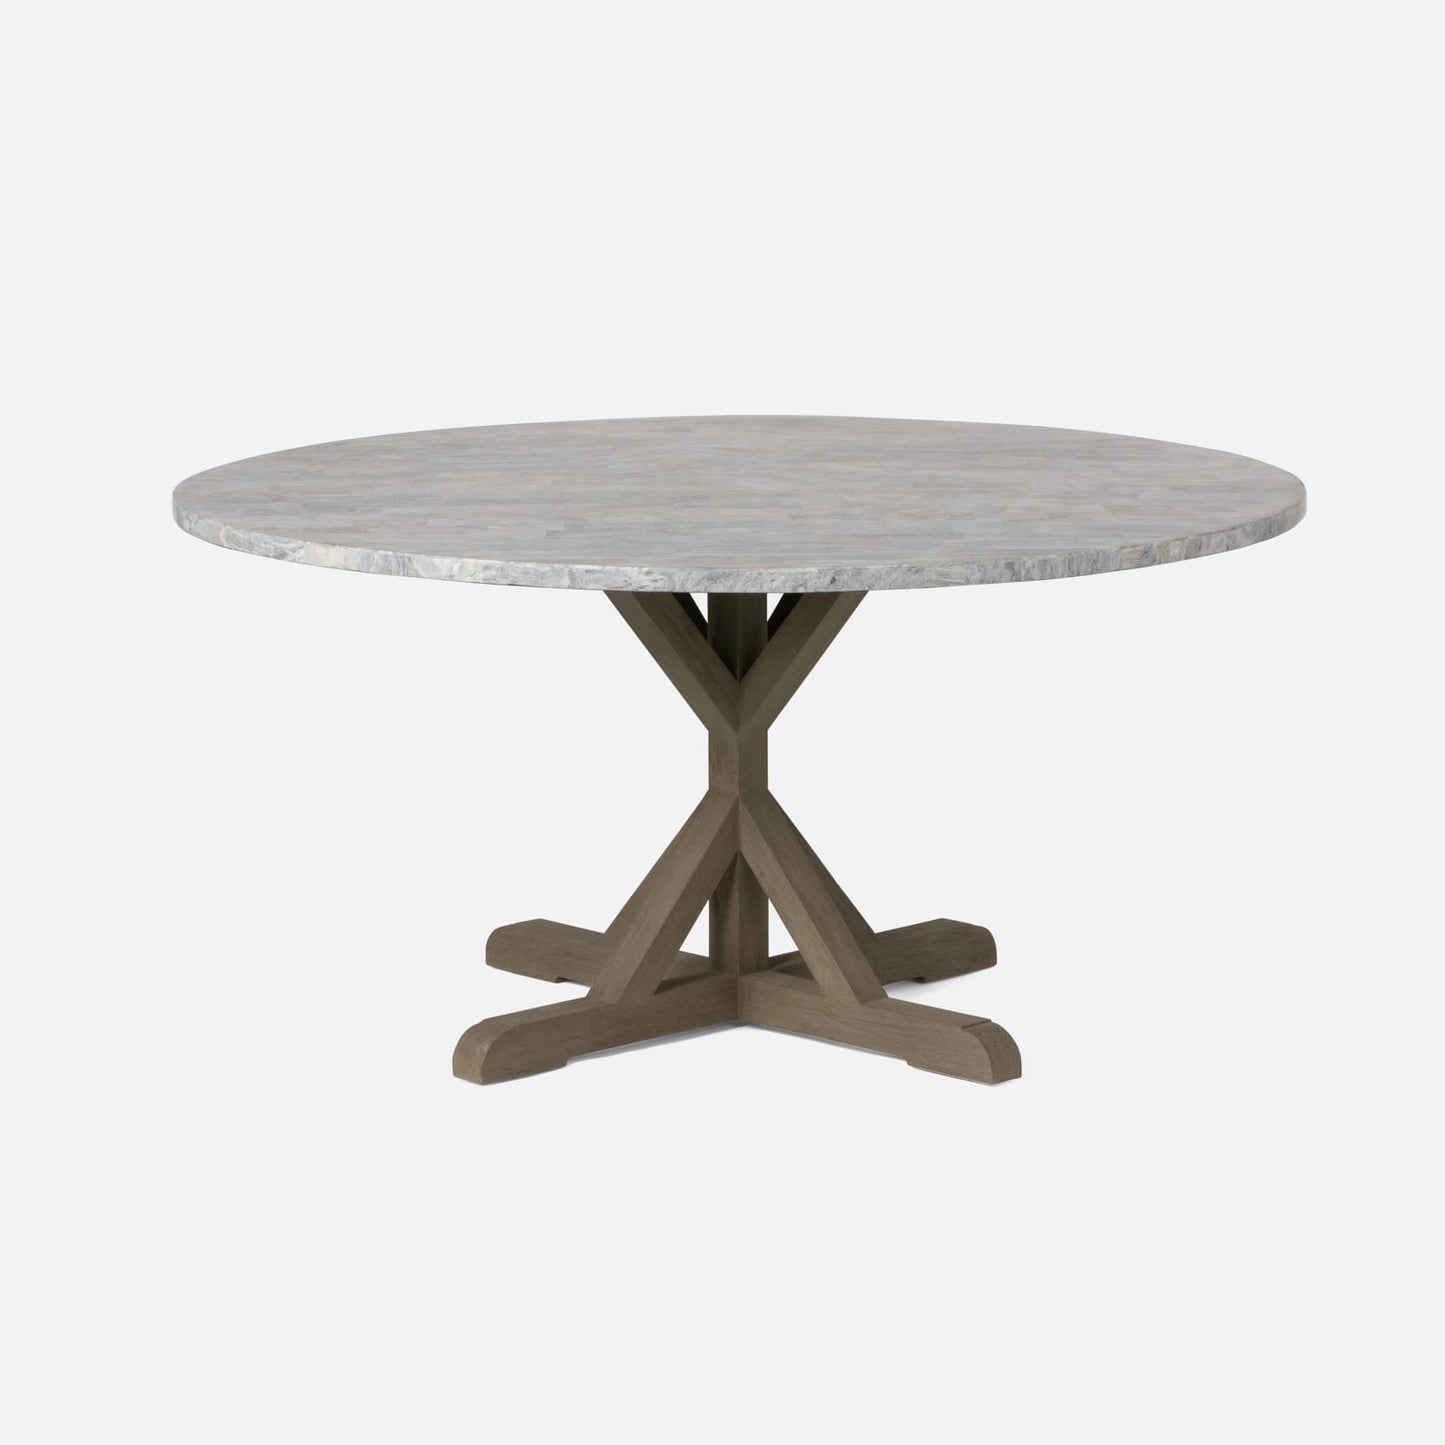 Made Goods Dane 60" x 30" Gray Cerused Oak Dinning Table With Round Warm Gray Marble Table Top